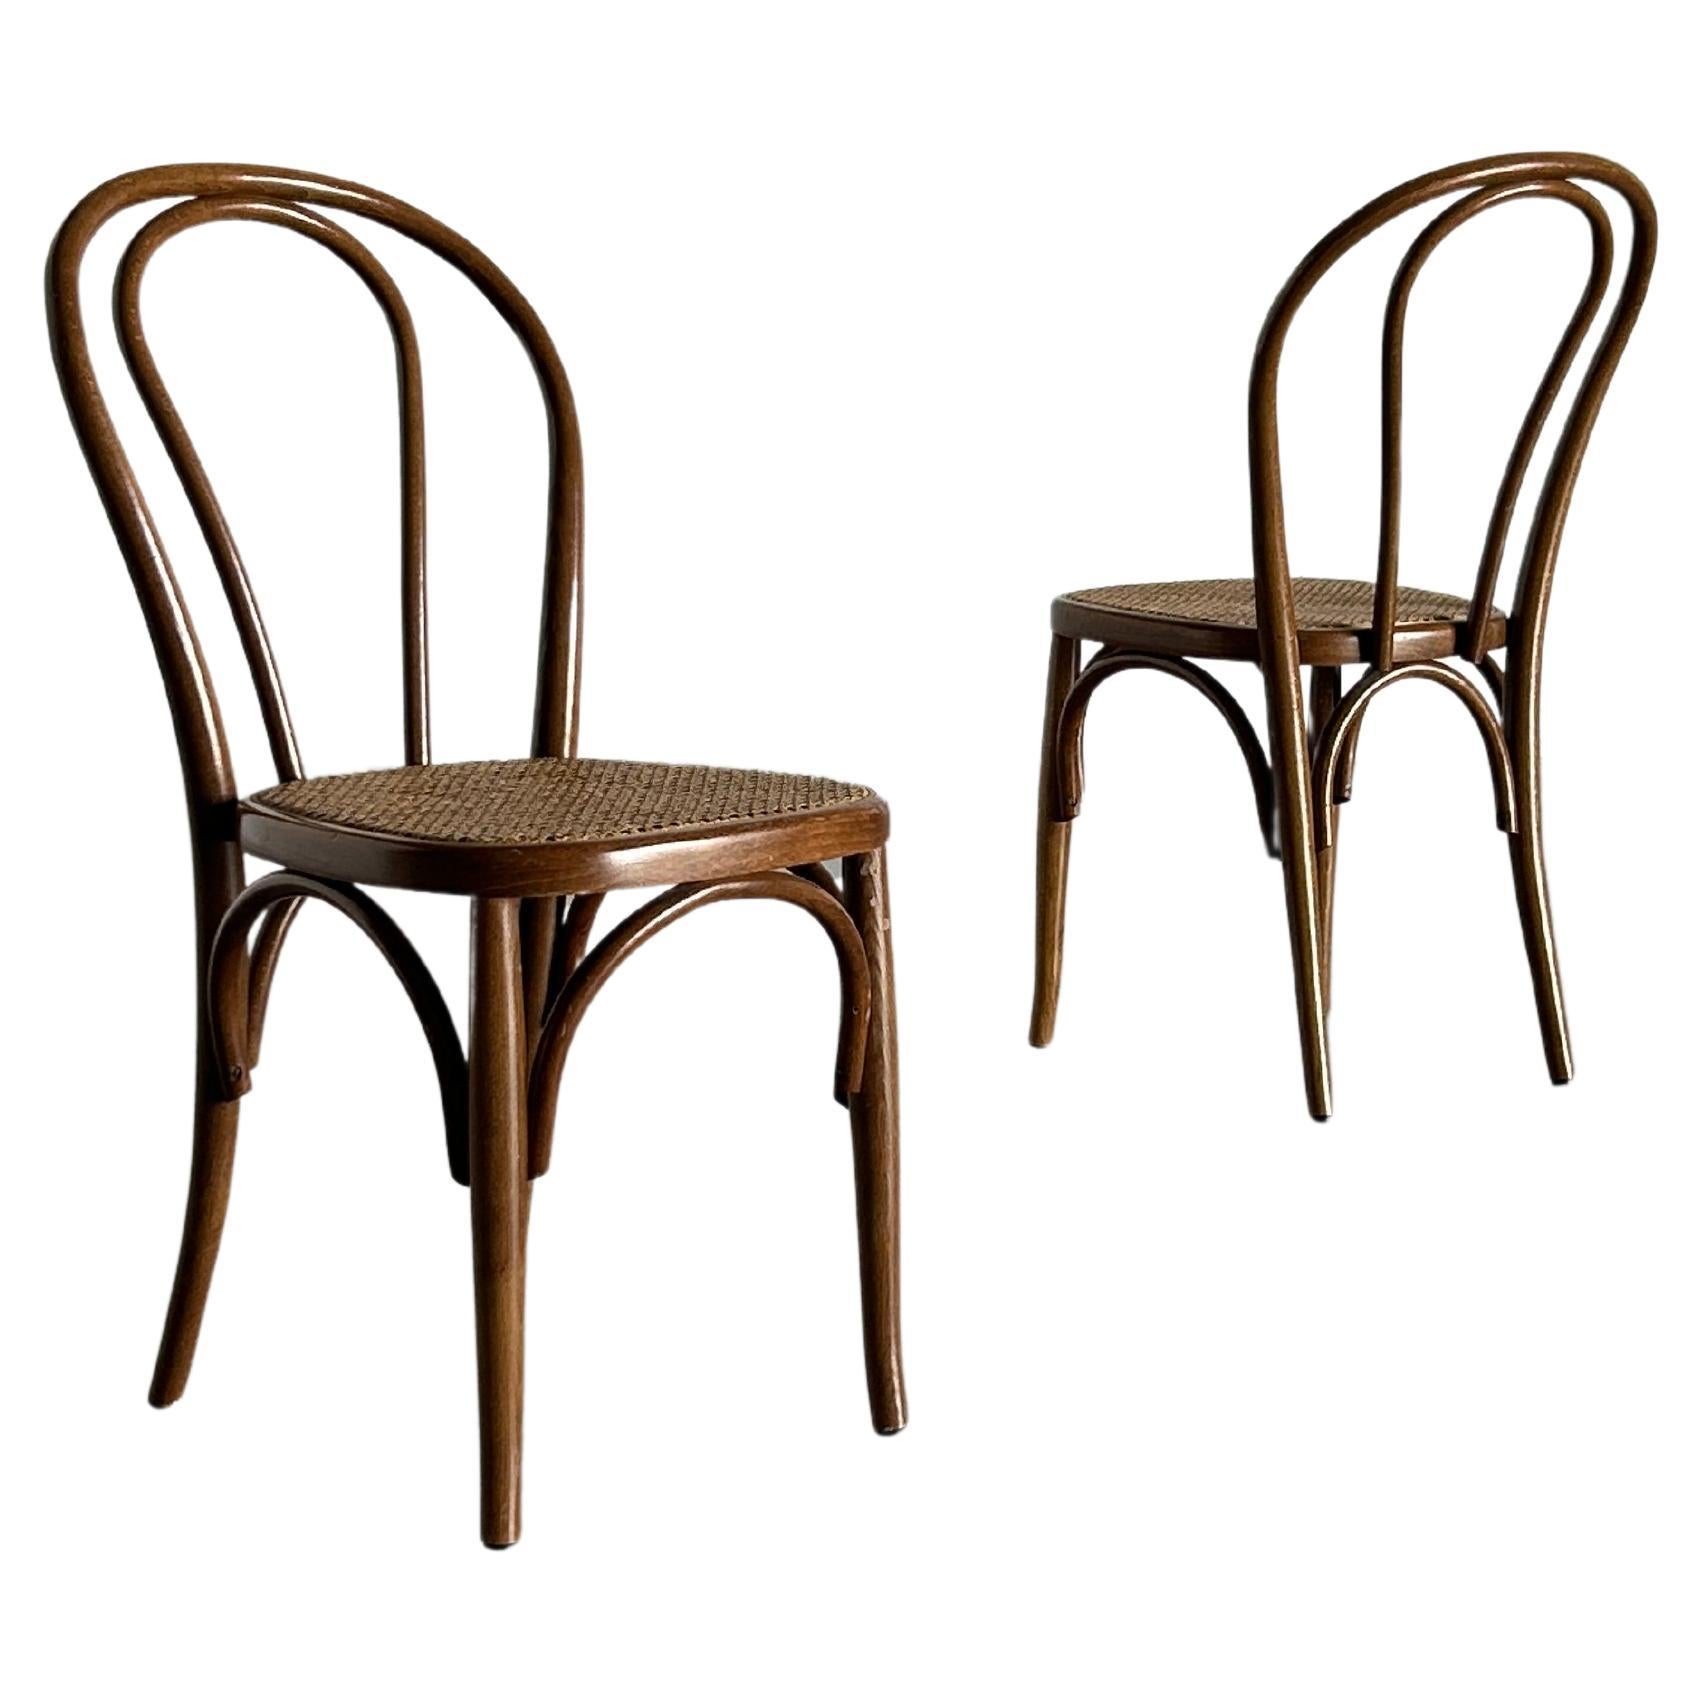 Pair of Vintage Thonet Bentwood Style Chairs No. 14 European Bistro Chairs, 70s